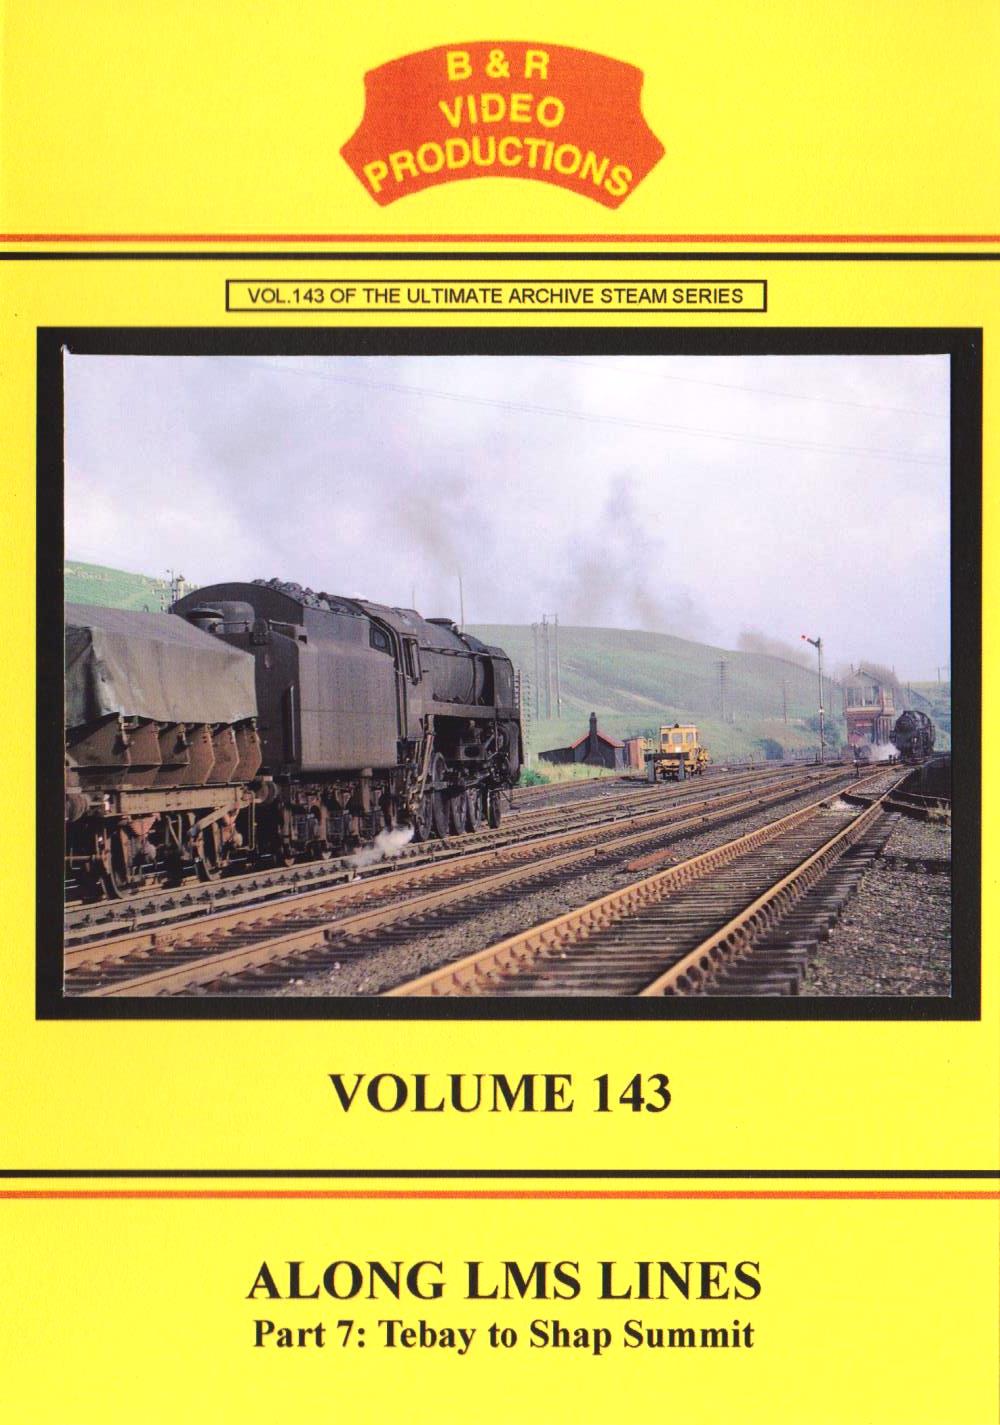 B & R Video Productions Vol 143 - Along LMS Lines Part 7 Tebay to Shap Summit